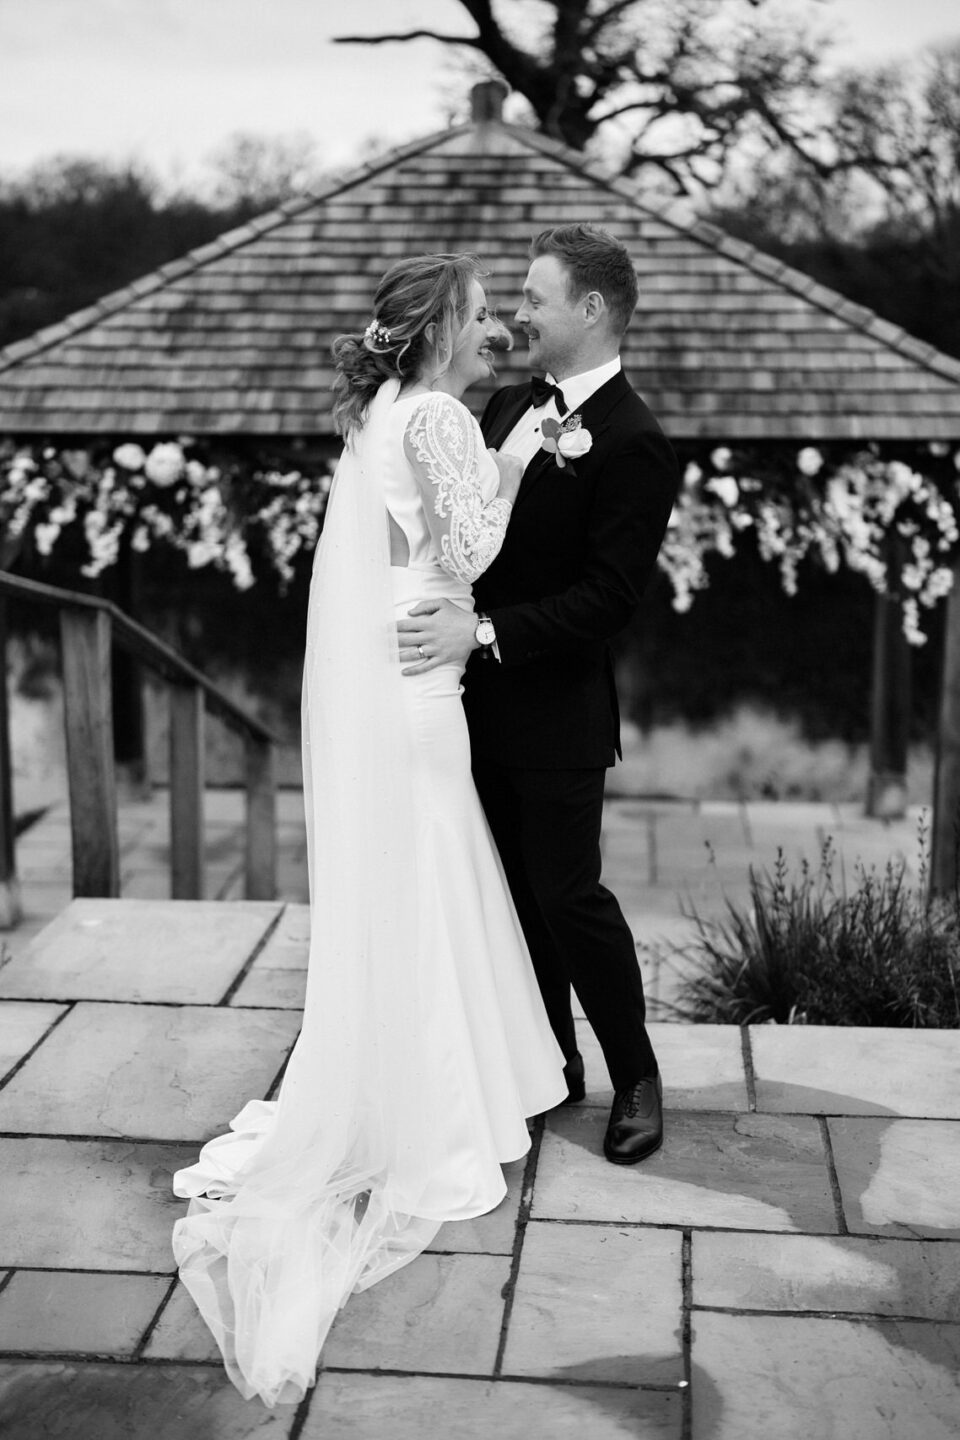 A couple getting married is smooching in front of a small outdoor structure.